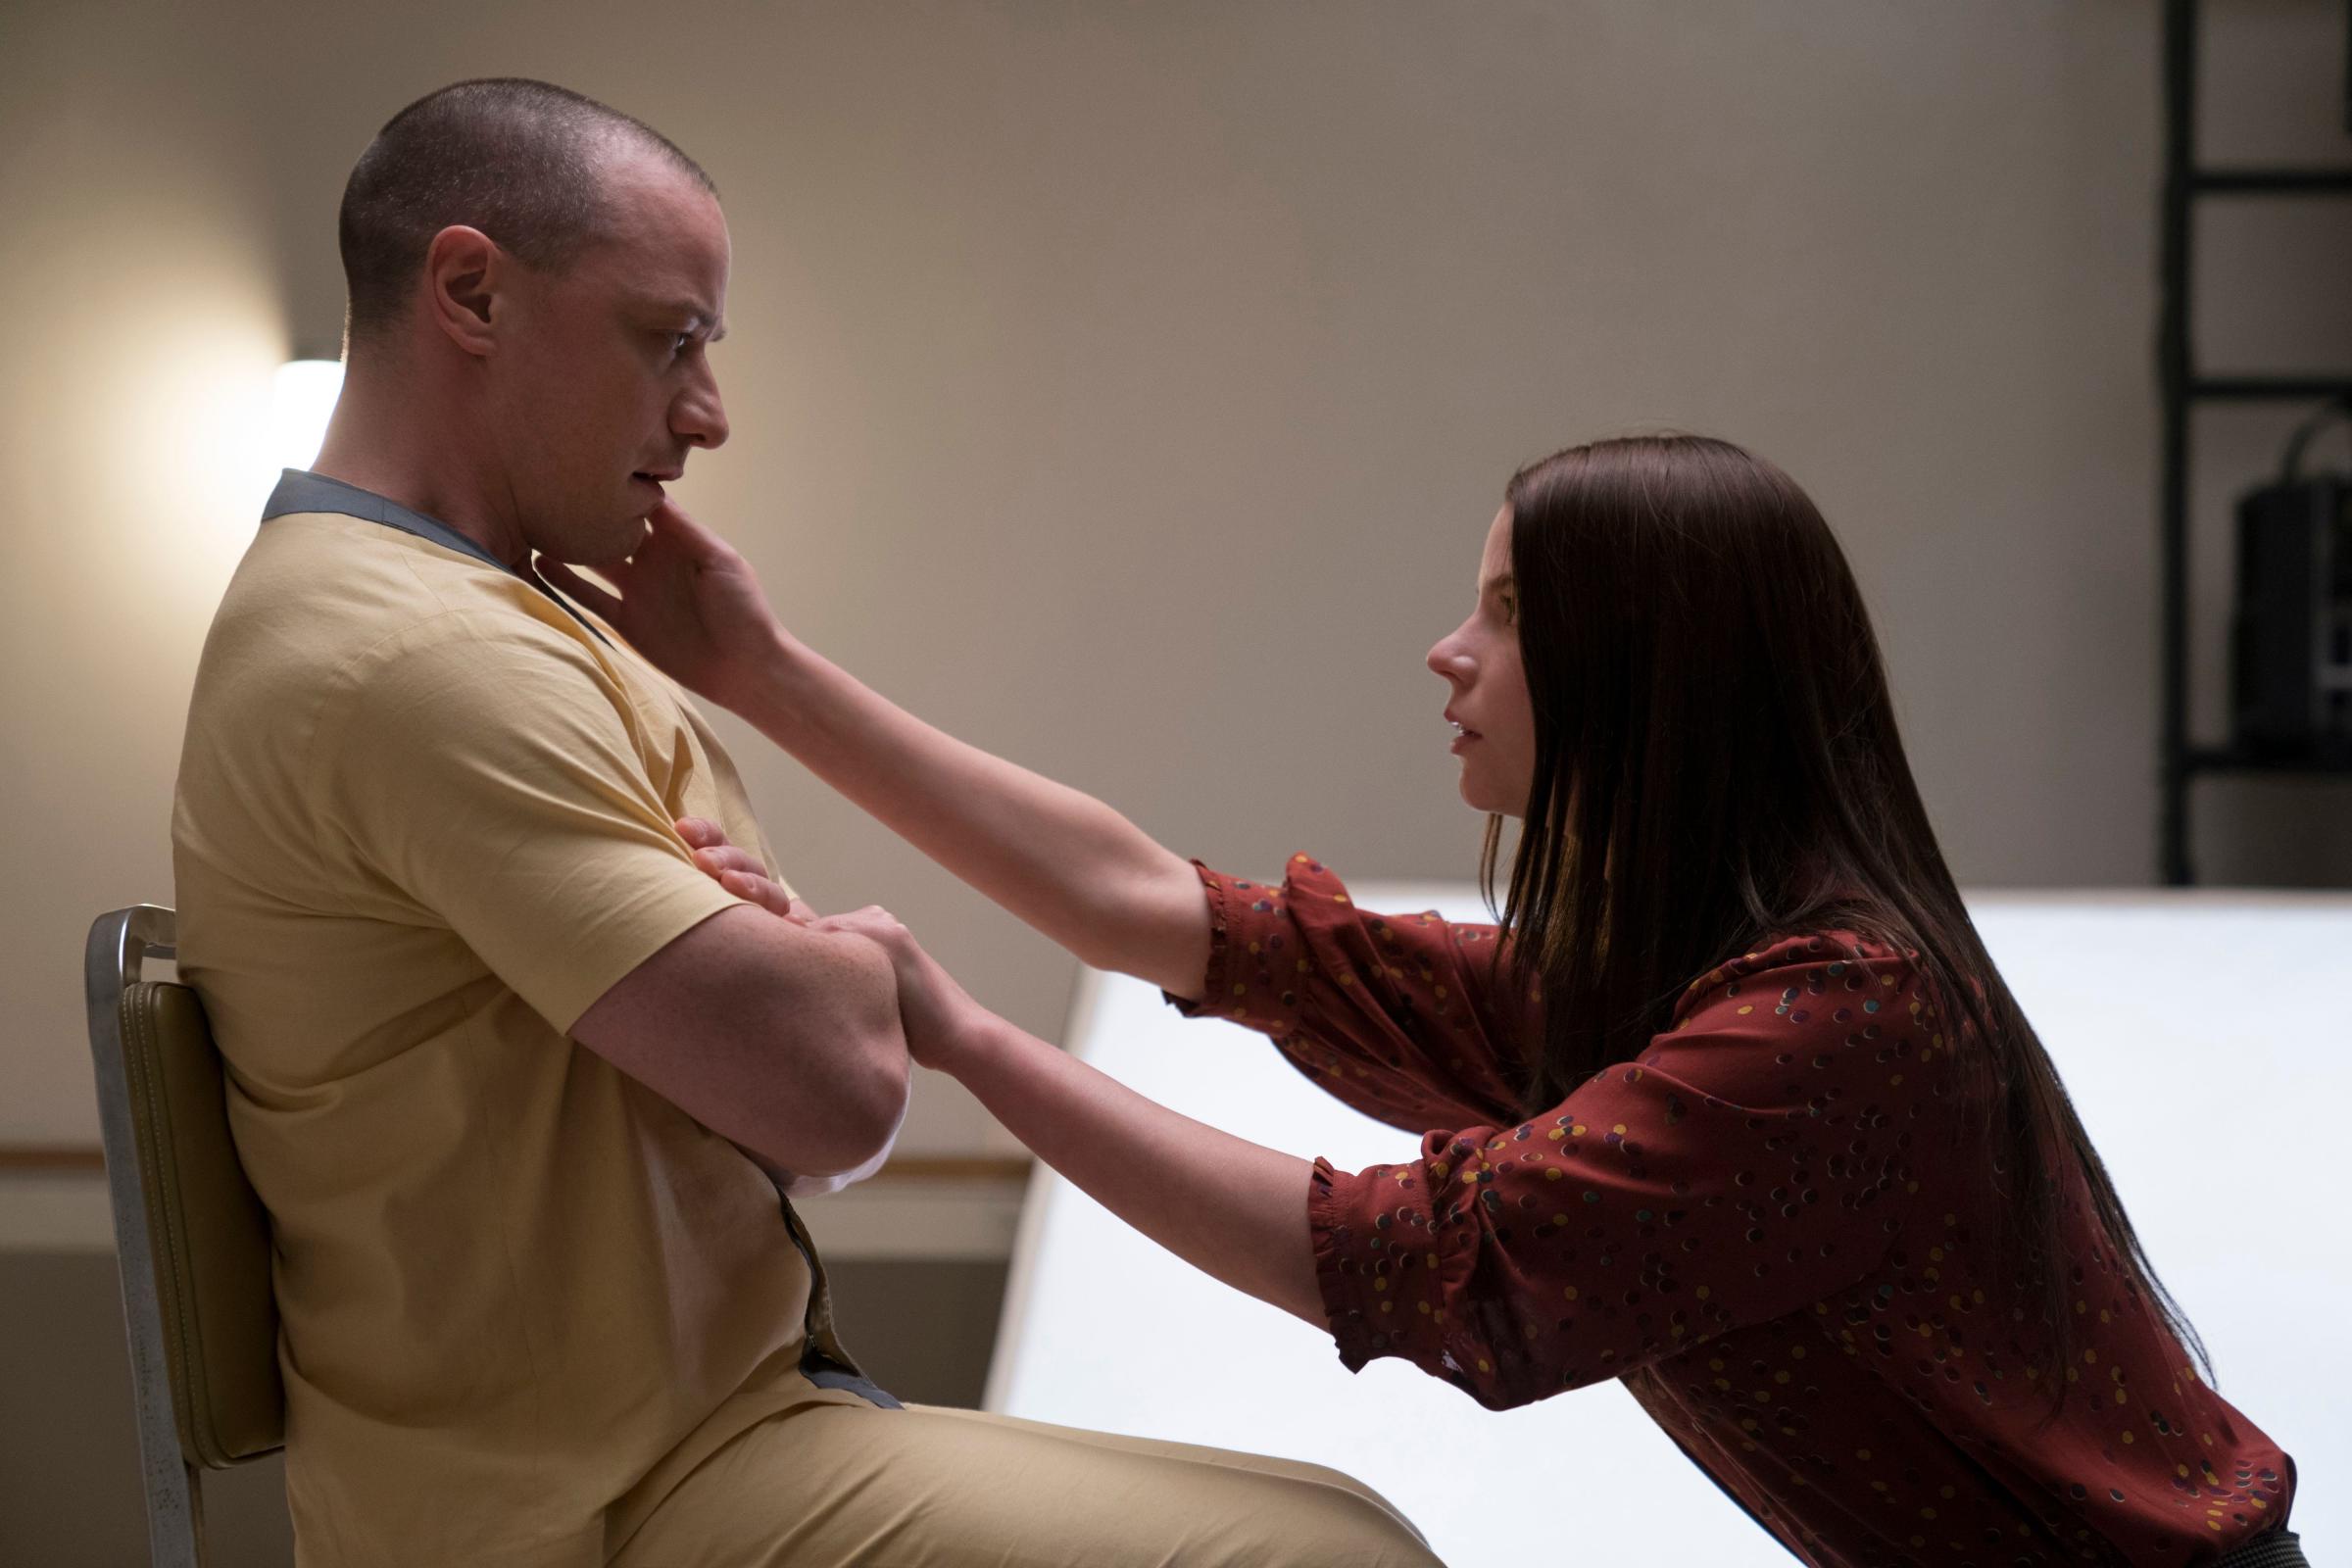 James McAvoy as Kevin Wendell Crumb/The Horde and Anya Taylor-Joy as Casey Cooke in 'Glass'